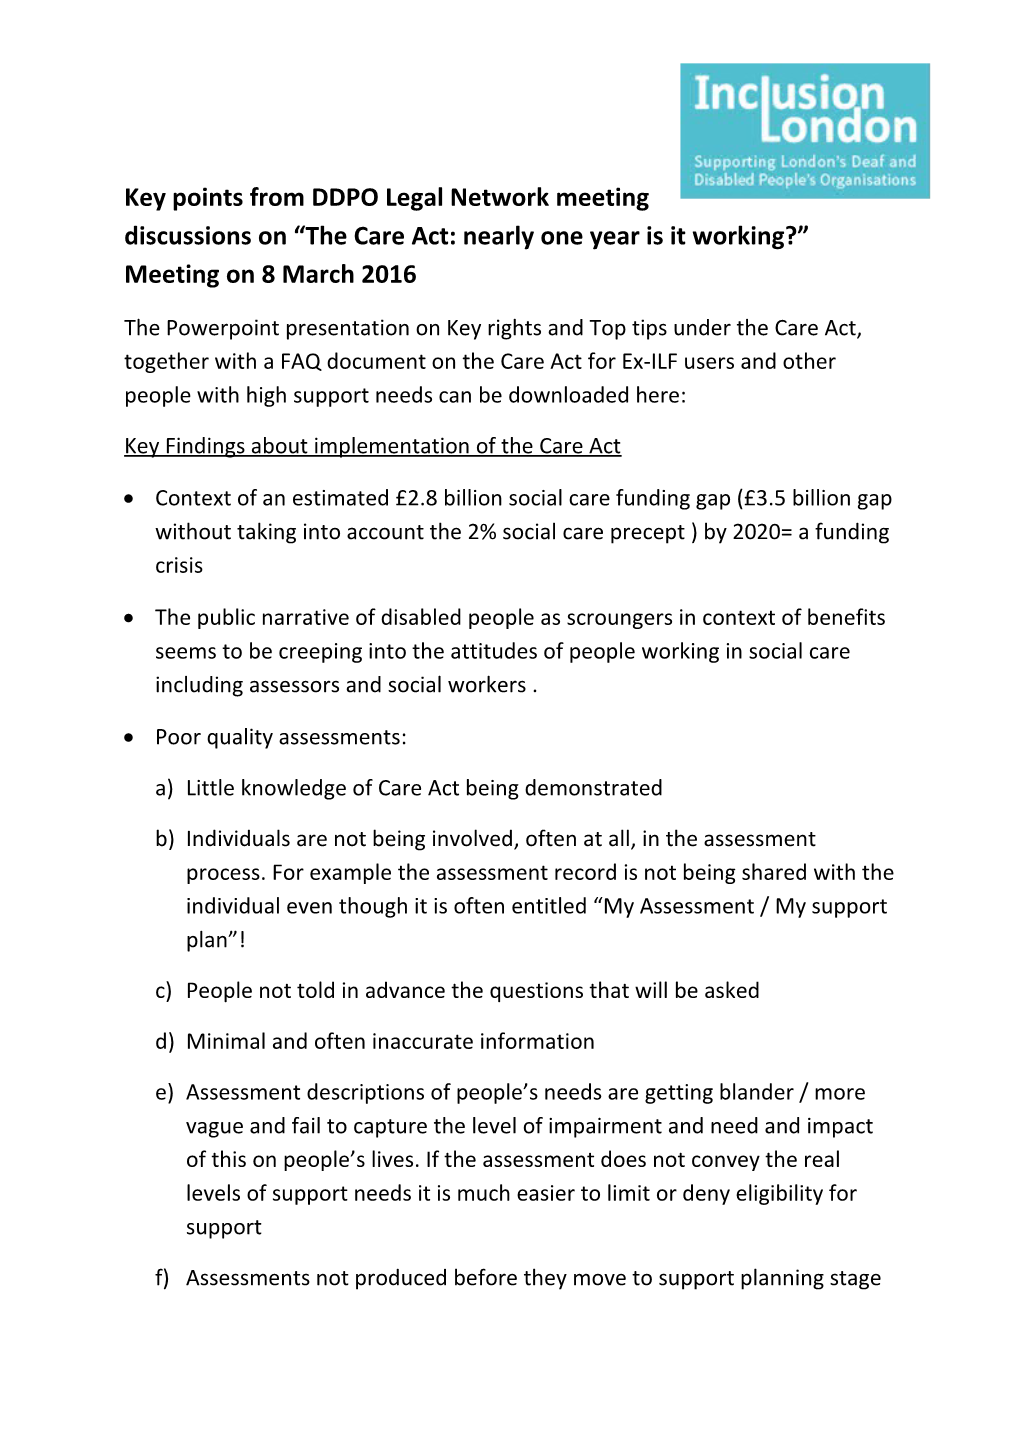 Key Findings About Implementation of the Care Act